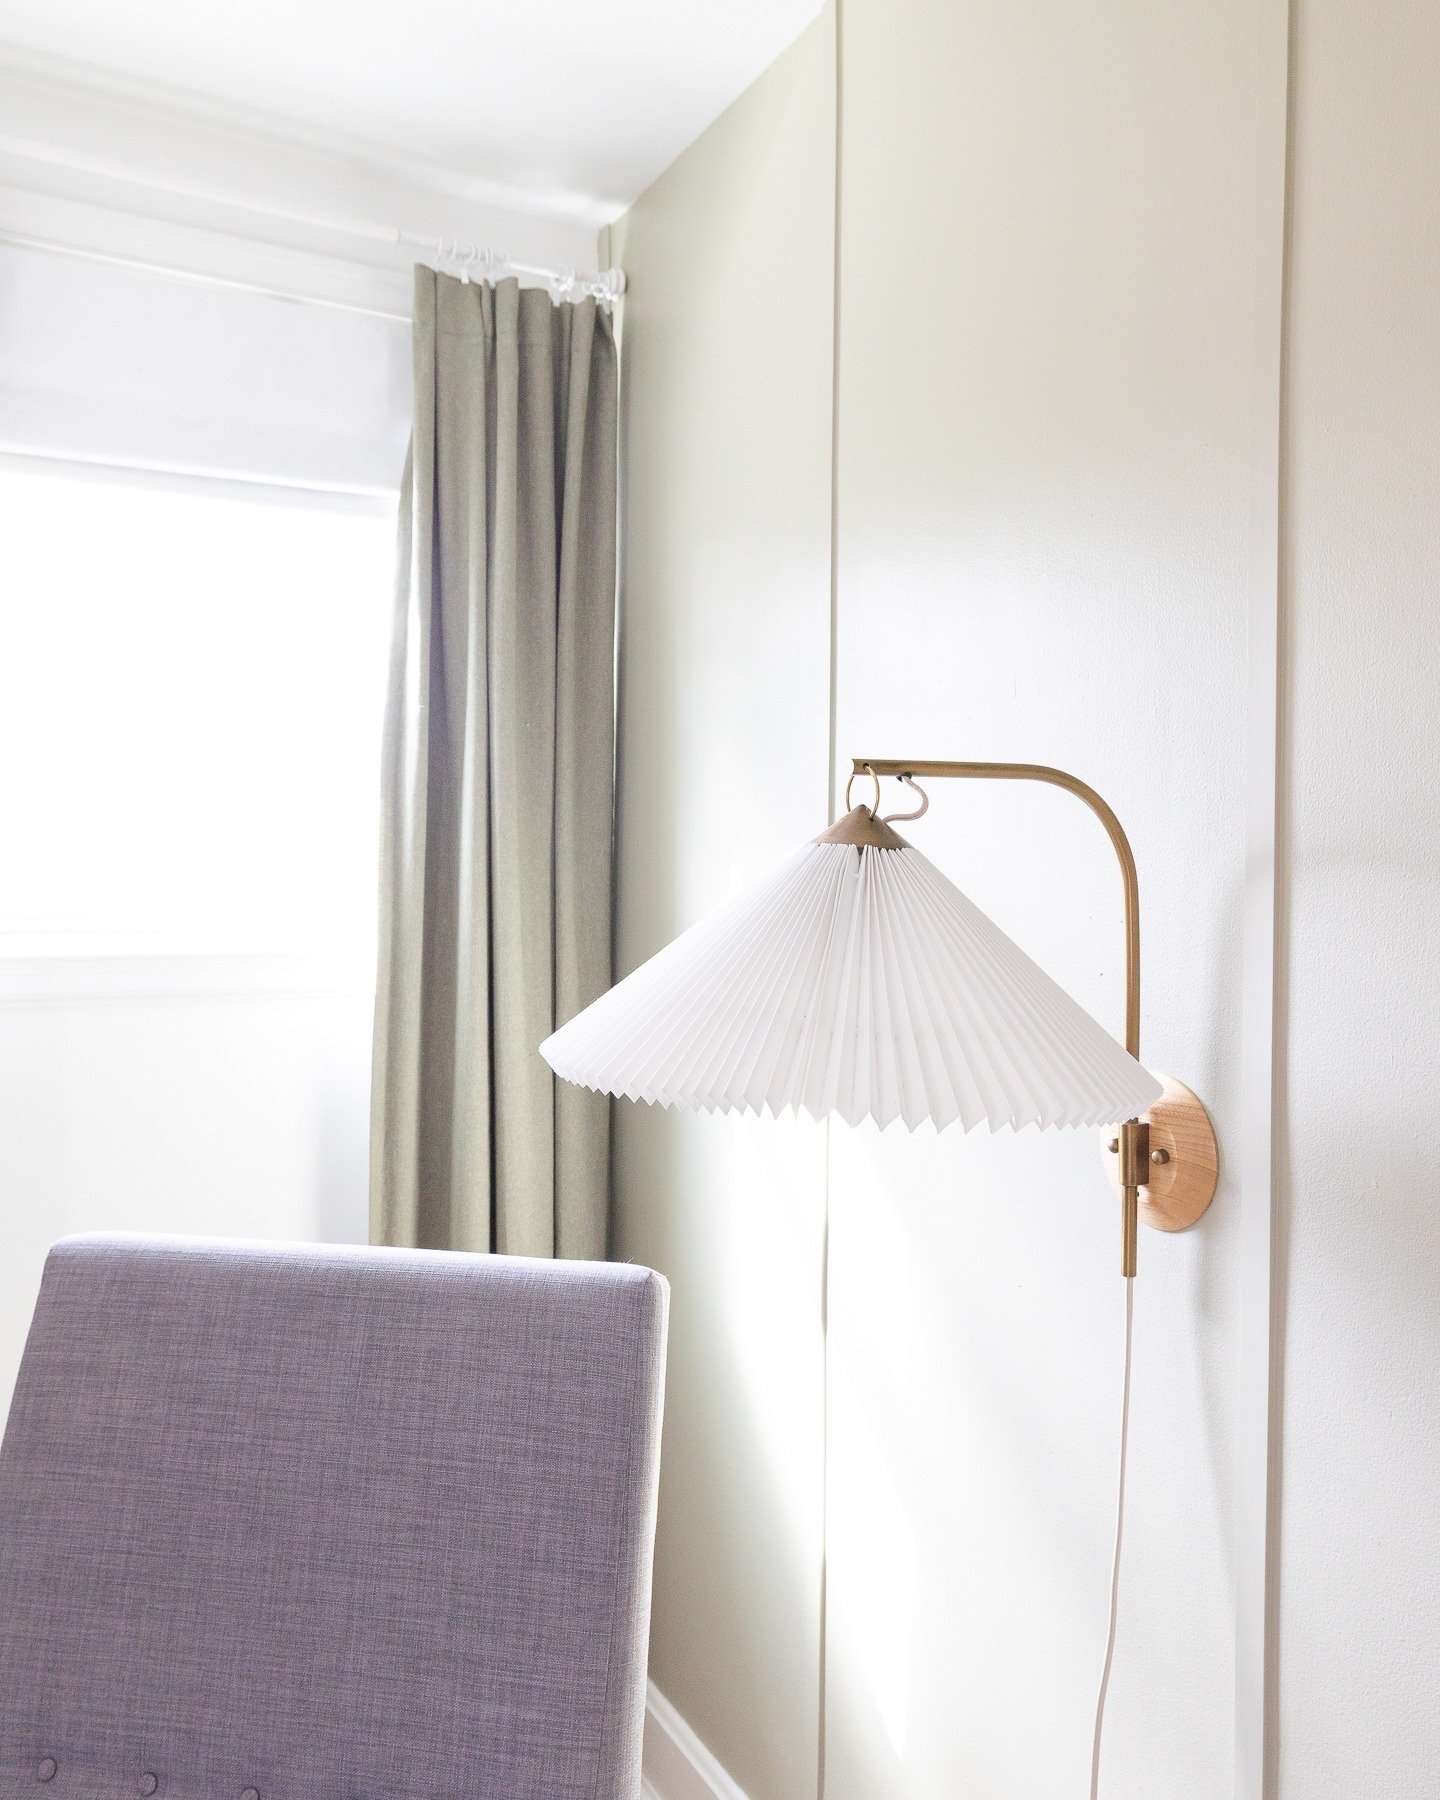 We love adding a plug in wall sconce in a room! Wall sconces instantly add a level of sophistication and make a room feel polished and custom. There are so many beautiful options these days that don't require the hassle of wiring. Doesn't this create